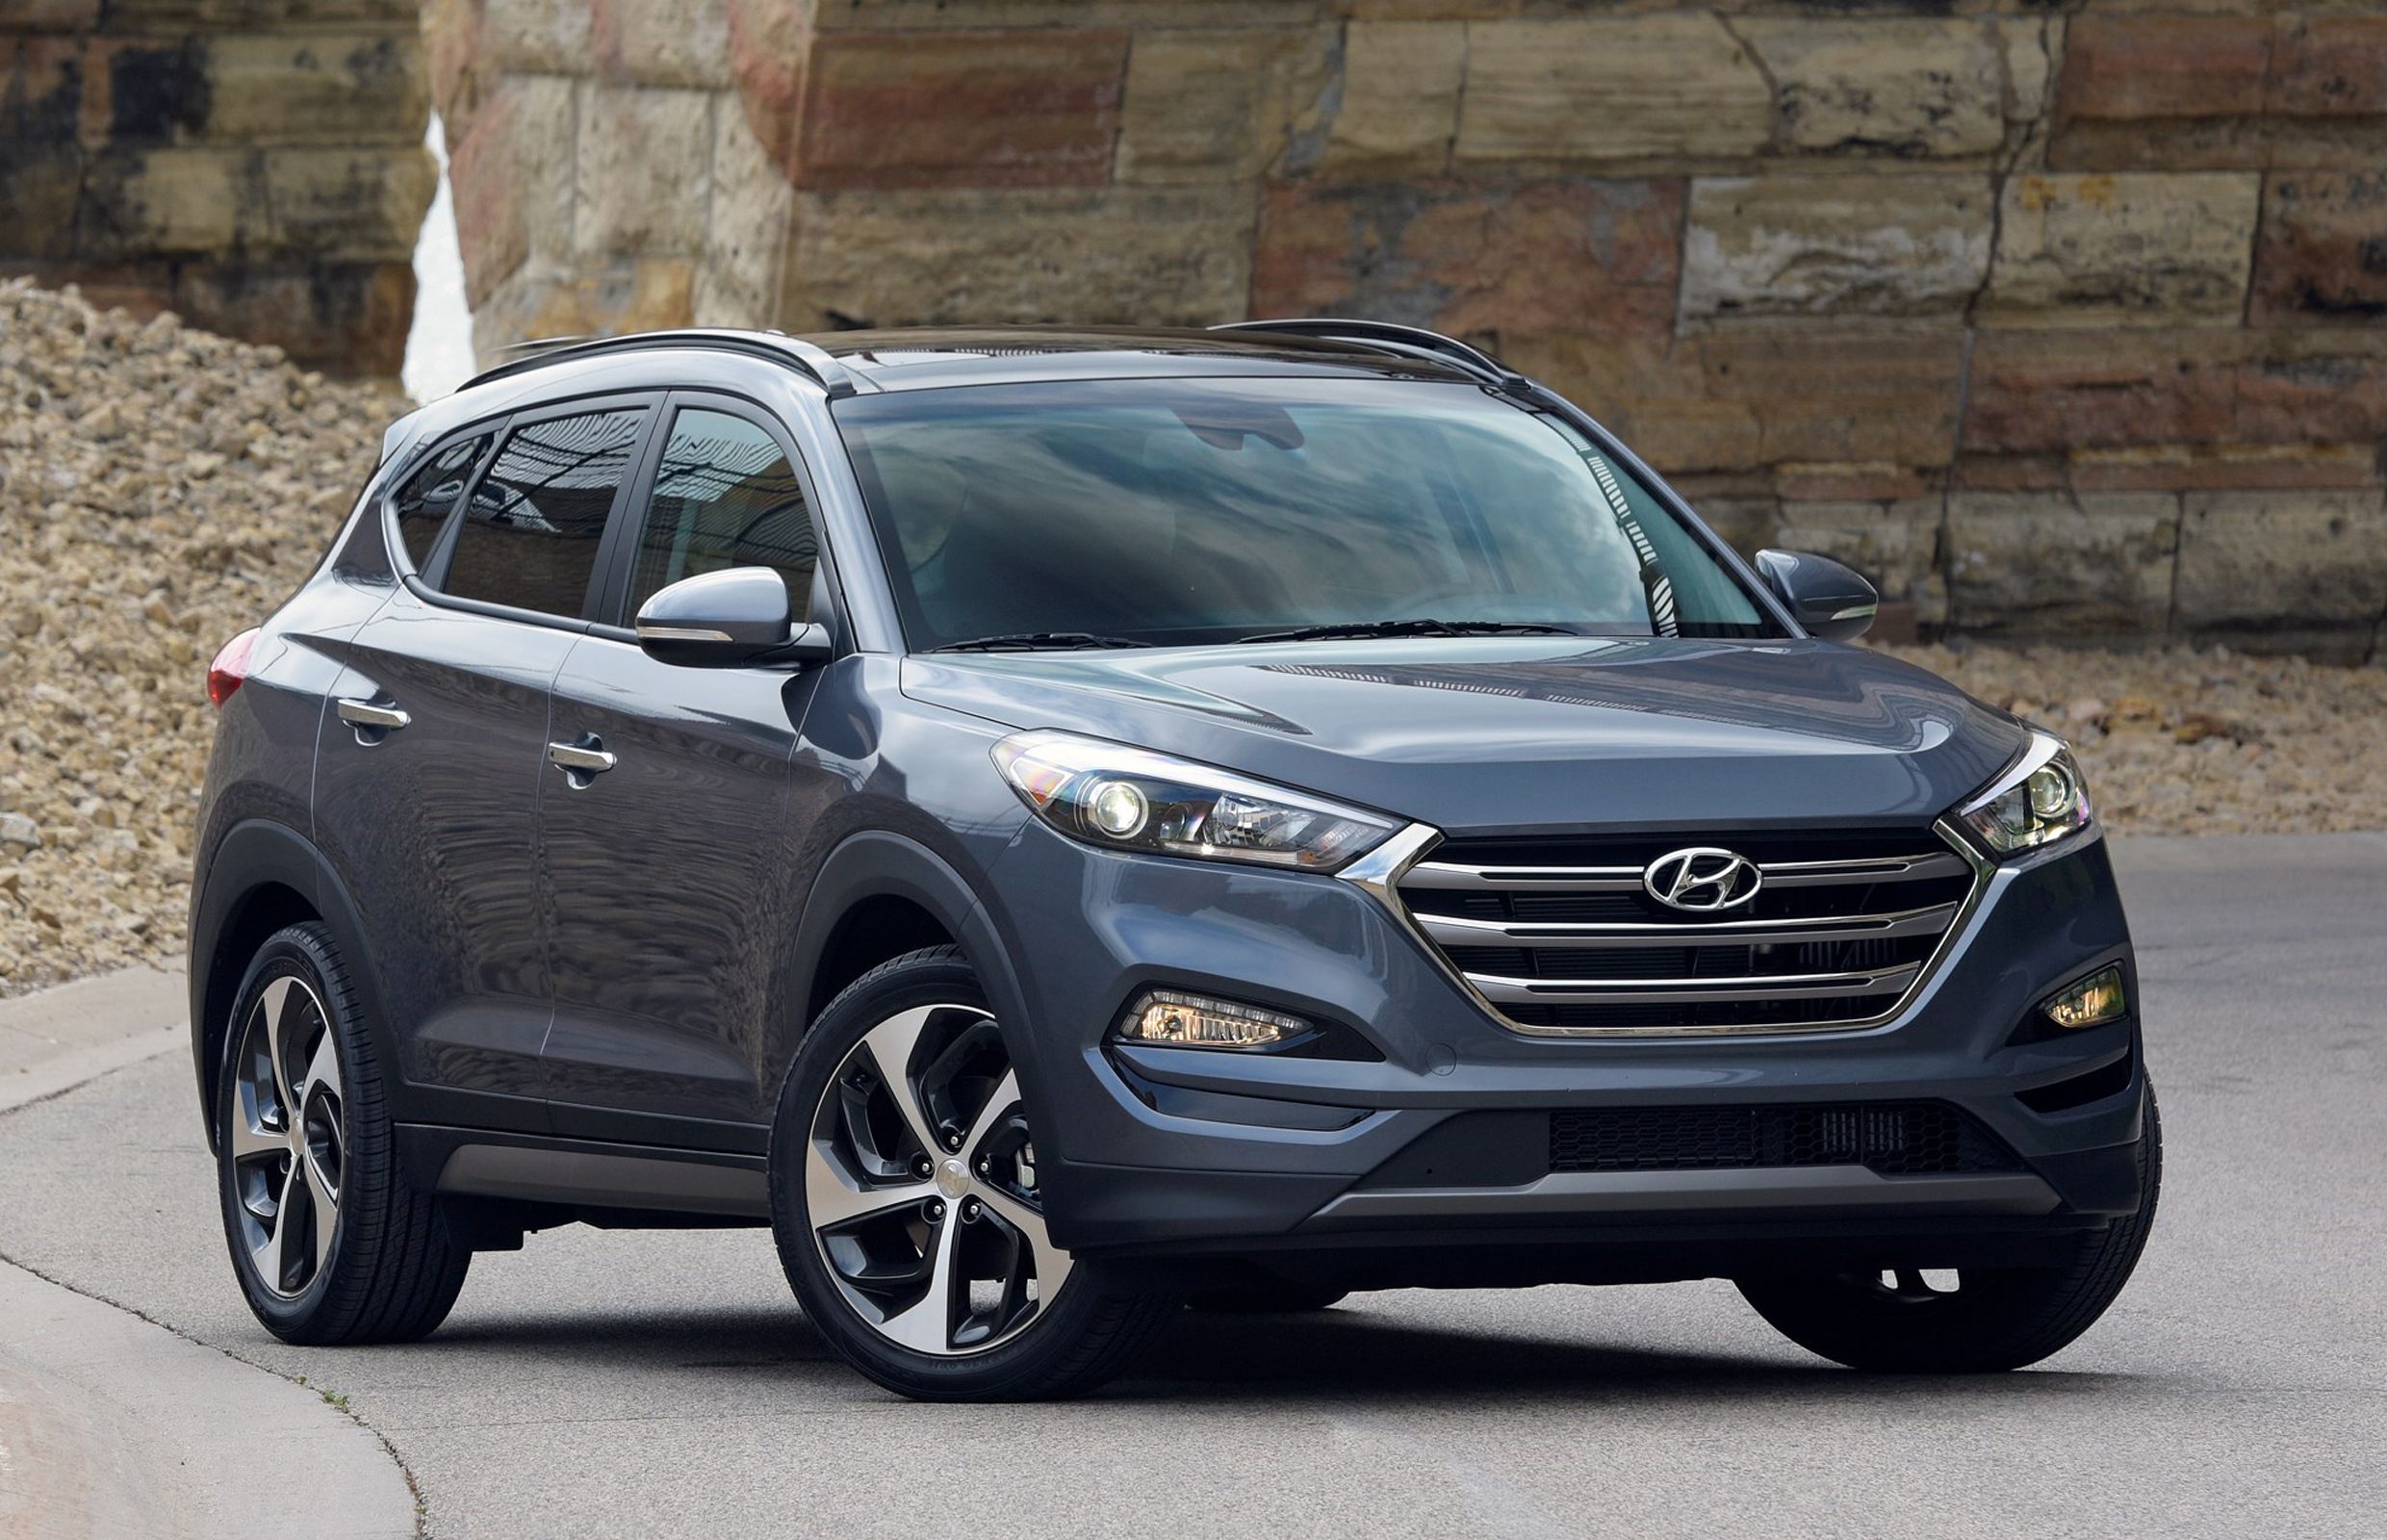 2025 Hyundai Tucson Previewed with Design Tweaks, Buttons Inside